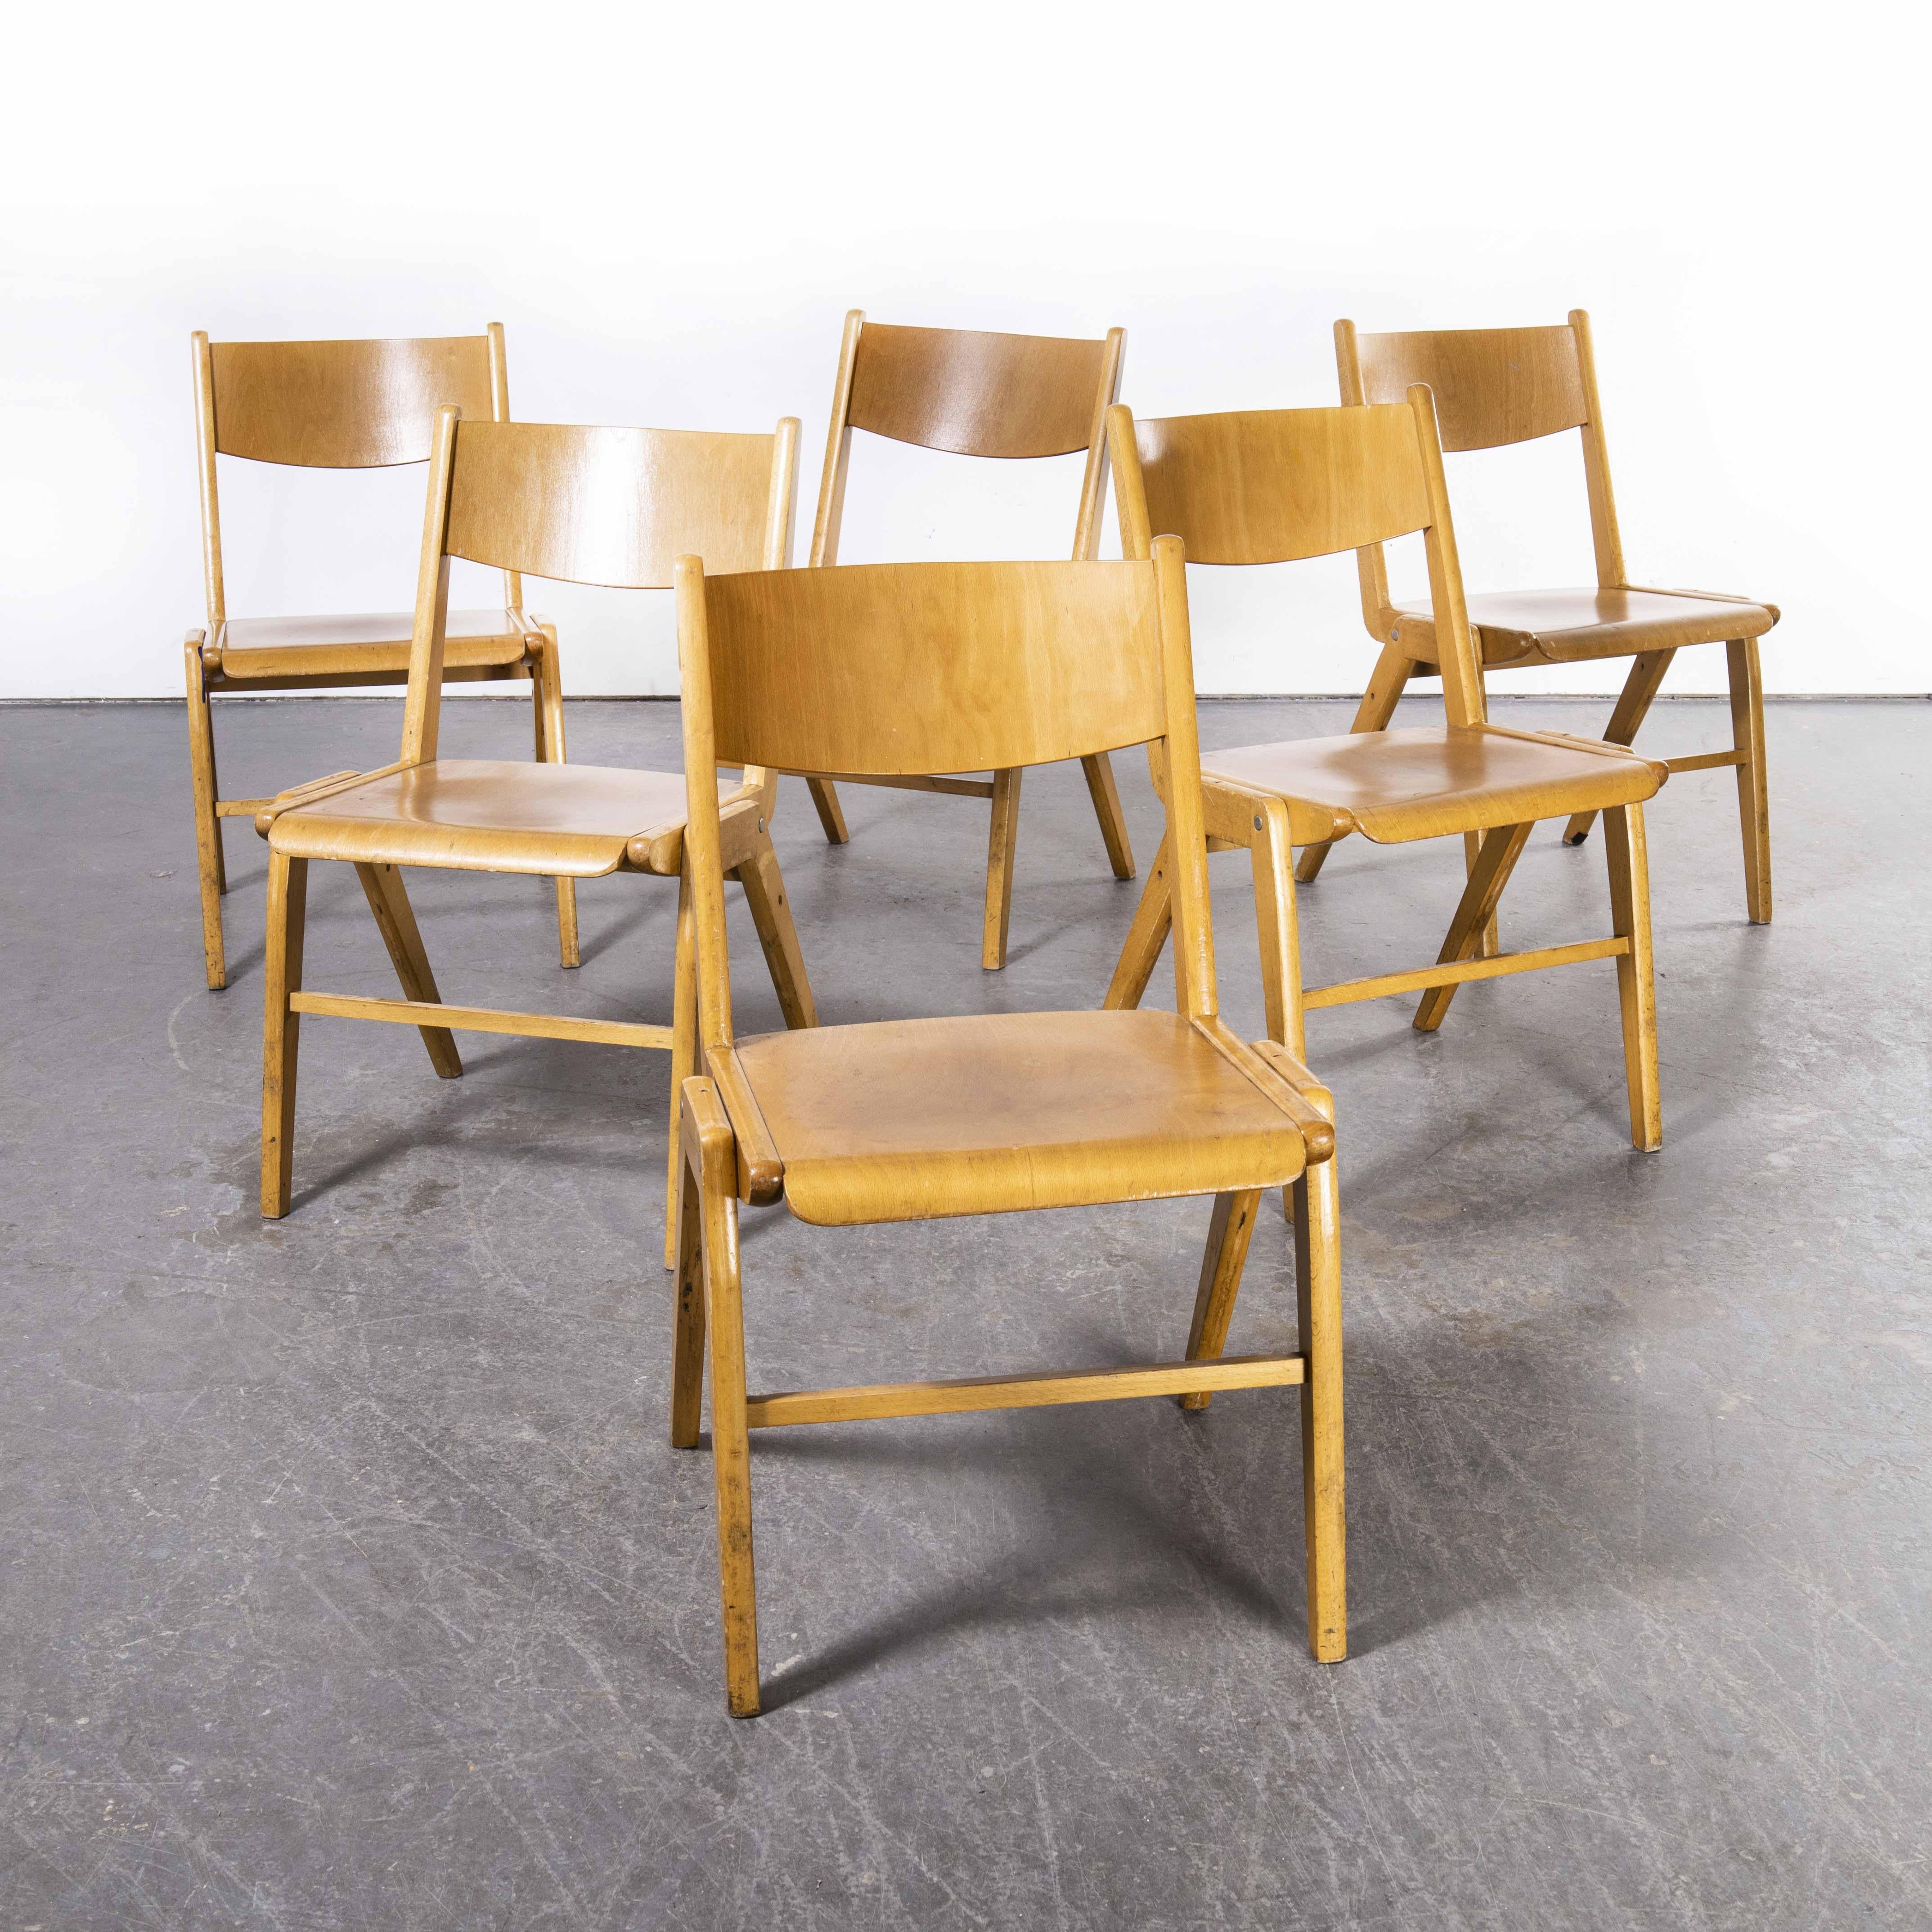 1970’s Original Casala Stacking dining chair – set of six
1970’s Original Casala Stacking dining chair – set of six. Casala is one of Germany’s best known furniture producers still producing to this day. This is one of their models in production